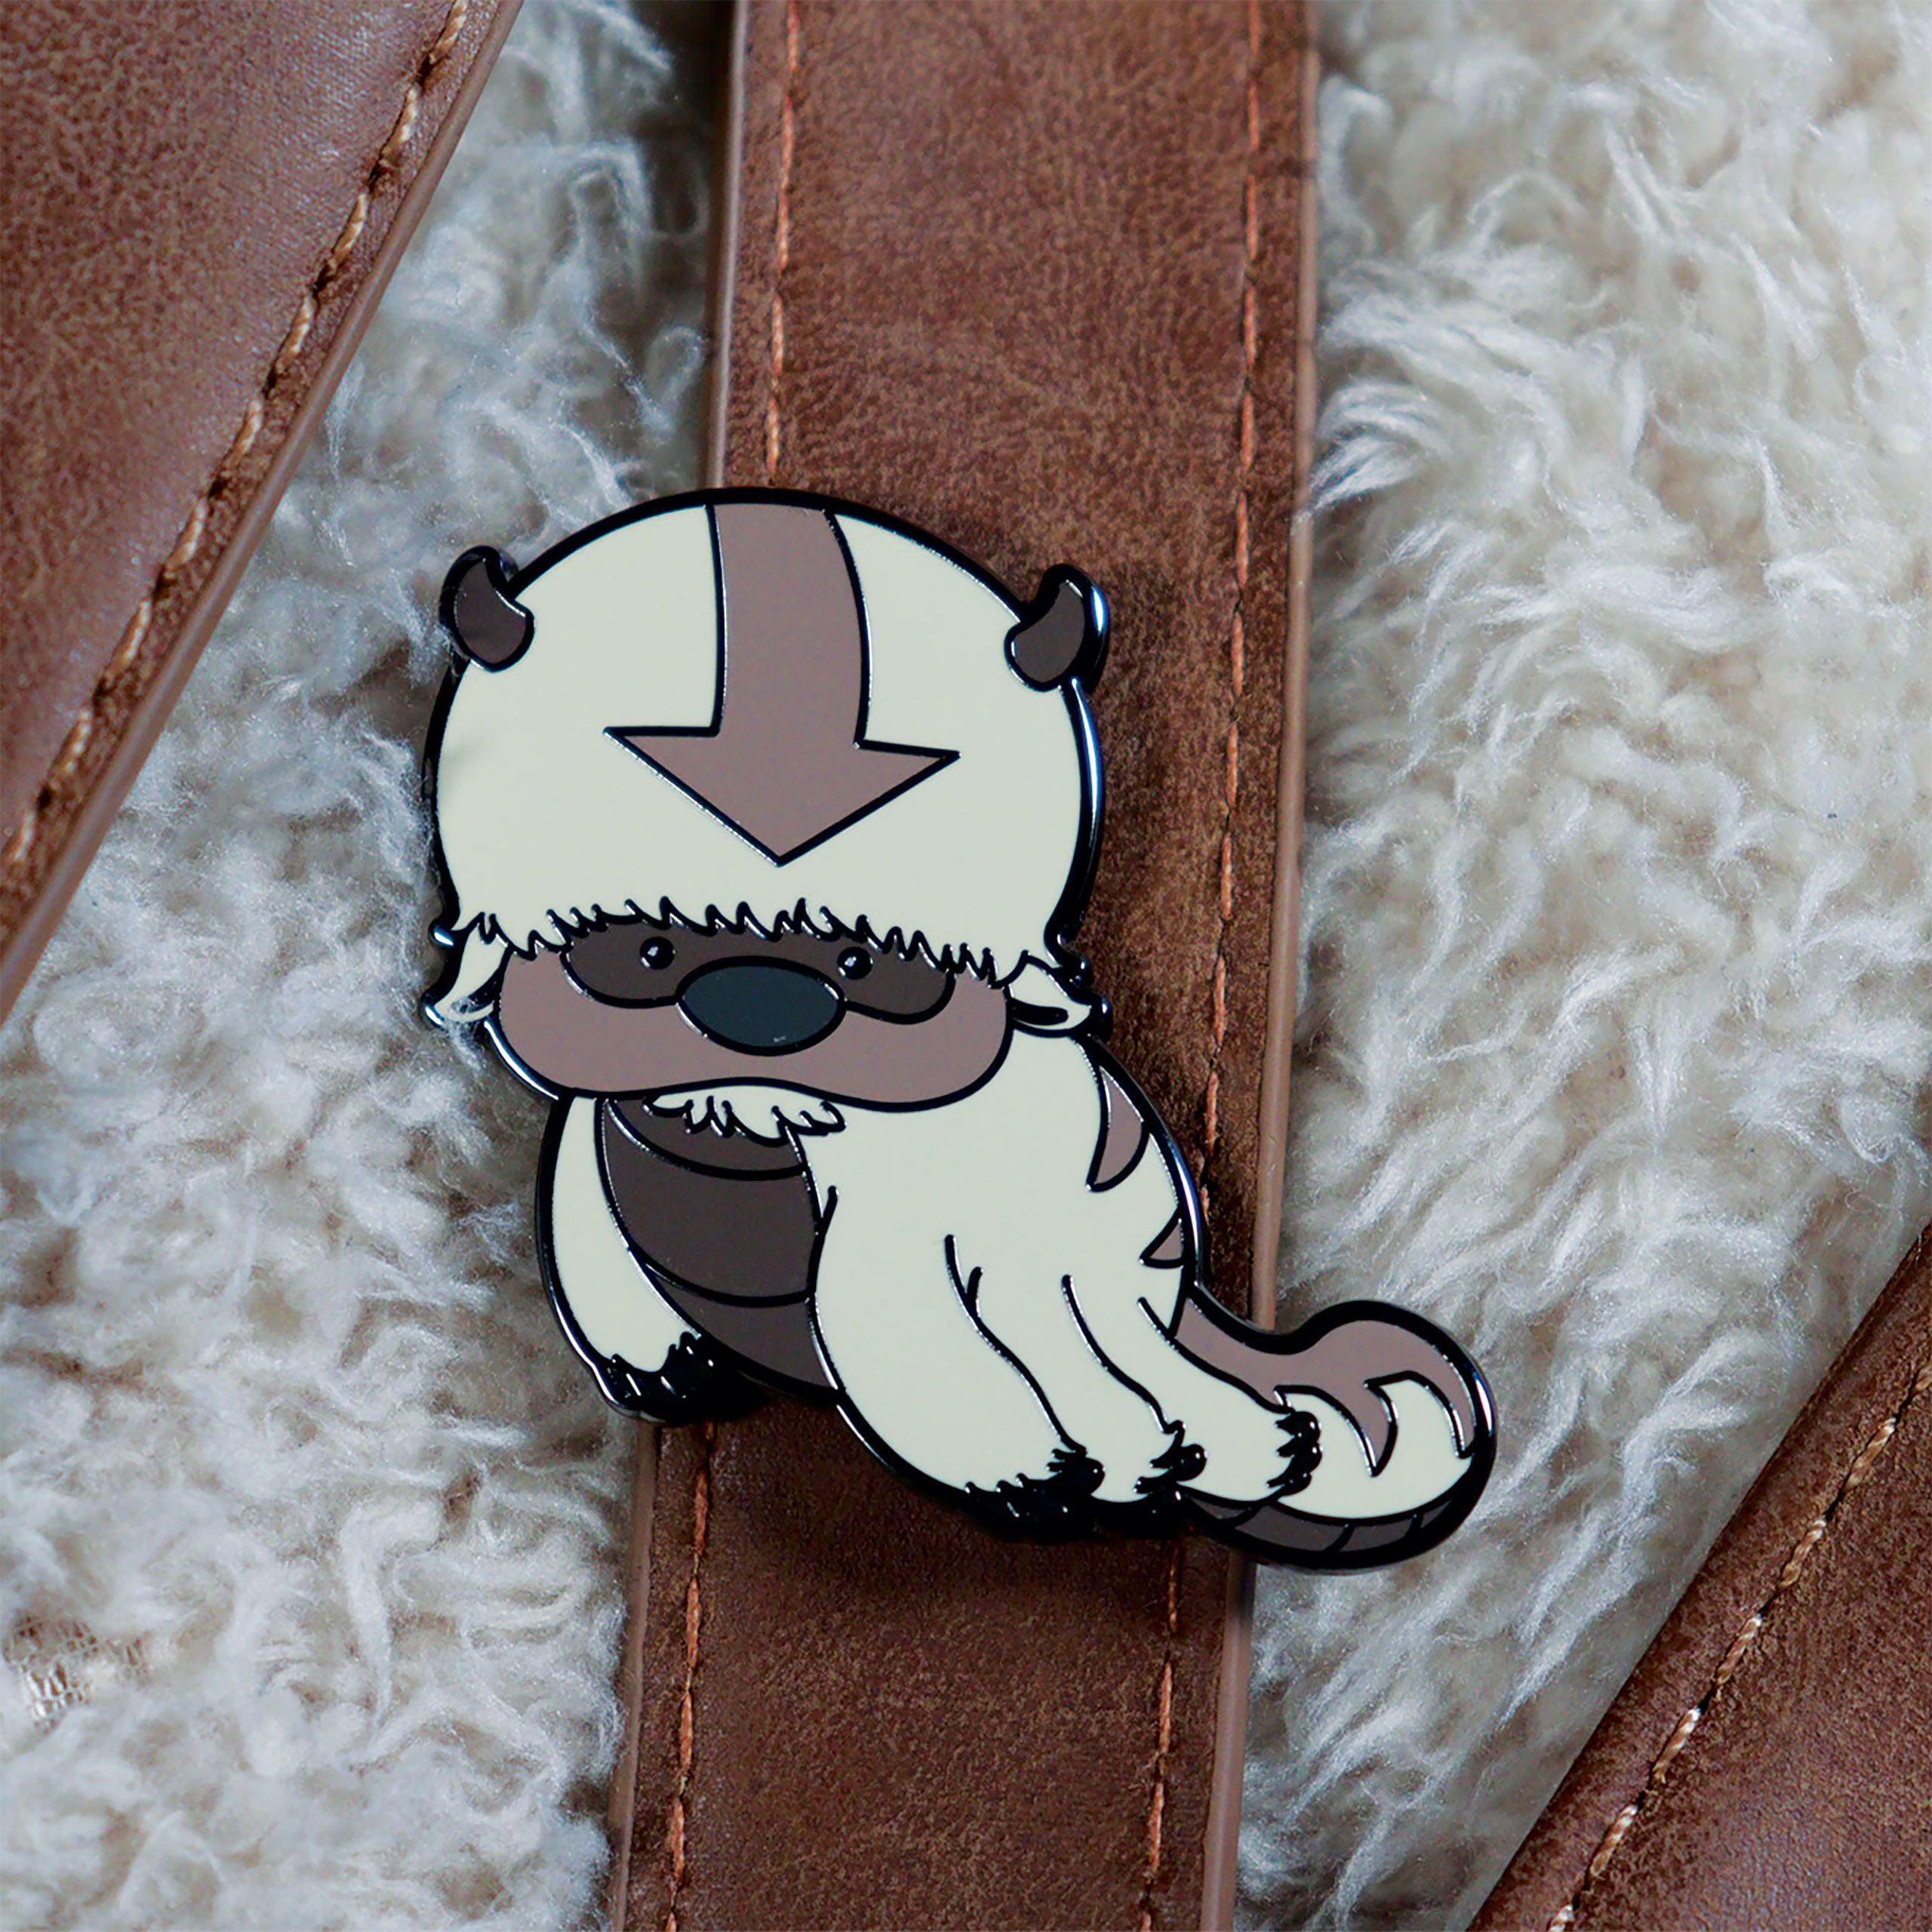 Avatar The Last Airbender - Appa Yip Yip Pin Limited Edition